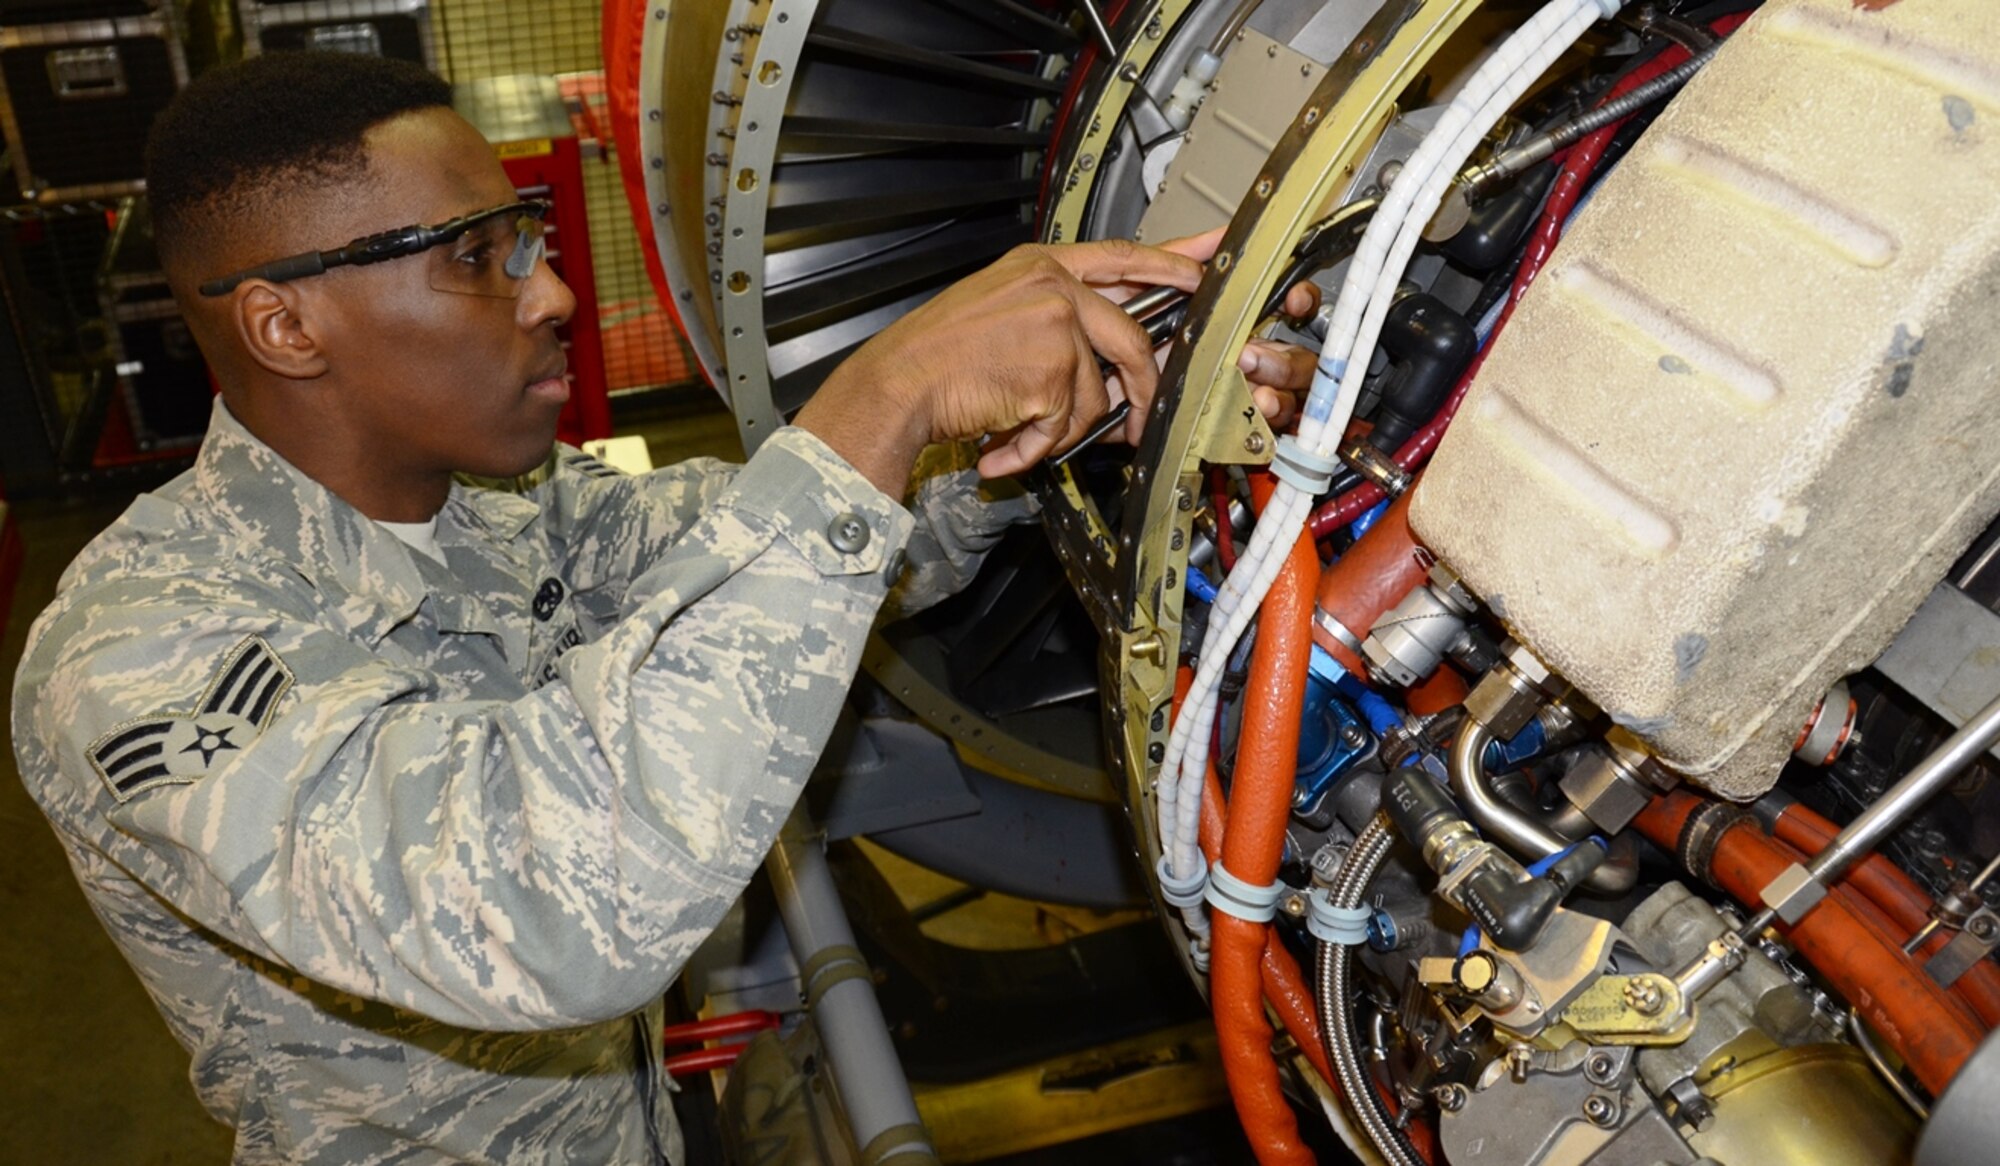 Senior Airman Jordan Traore, 175th Maintenance Squadron, works on an engine for an A-10C Thunderbolt II. Traore is the June spotlight Airman in the Maryland Air National Guard. (U.S. Air National Guard photo by Tech. Sgt. David Speicher/RELEASED)